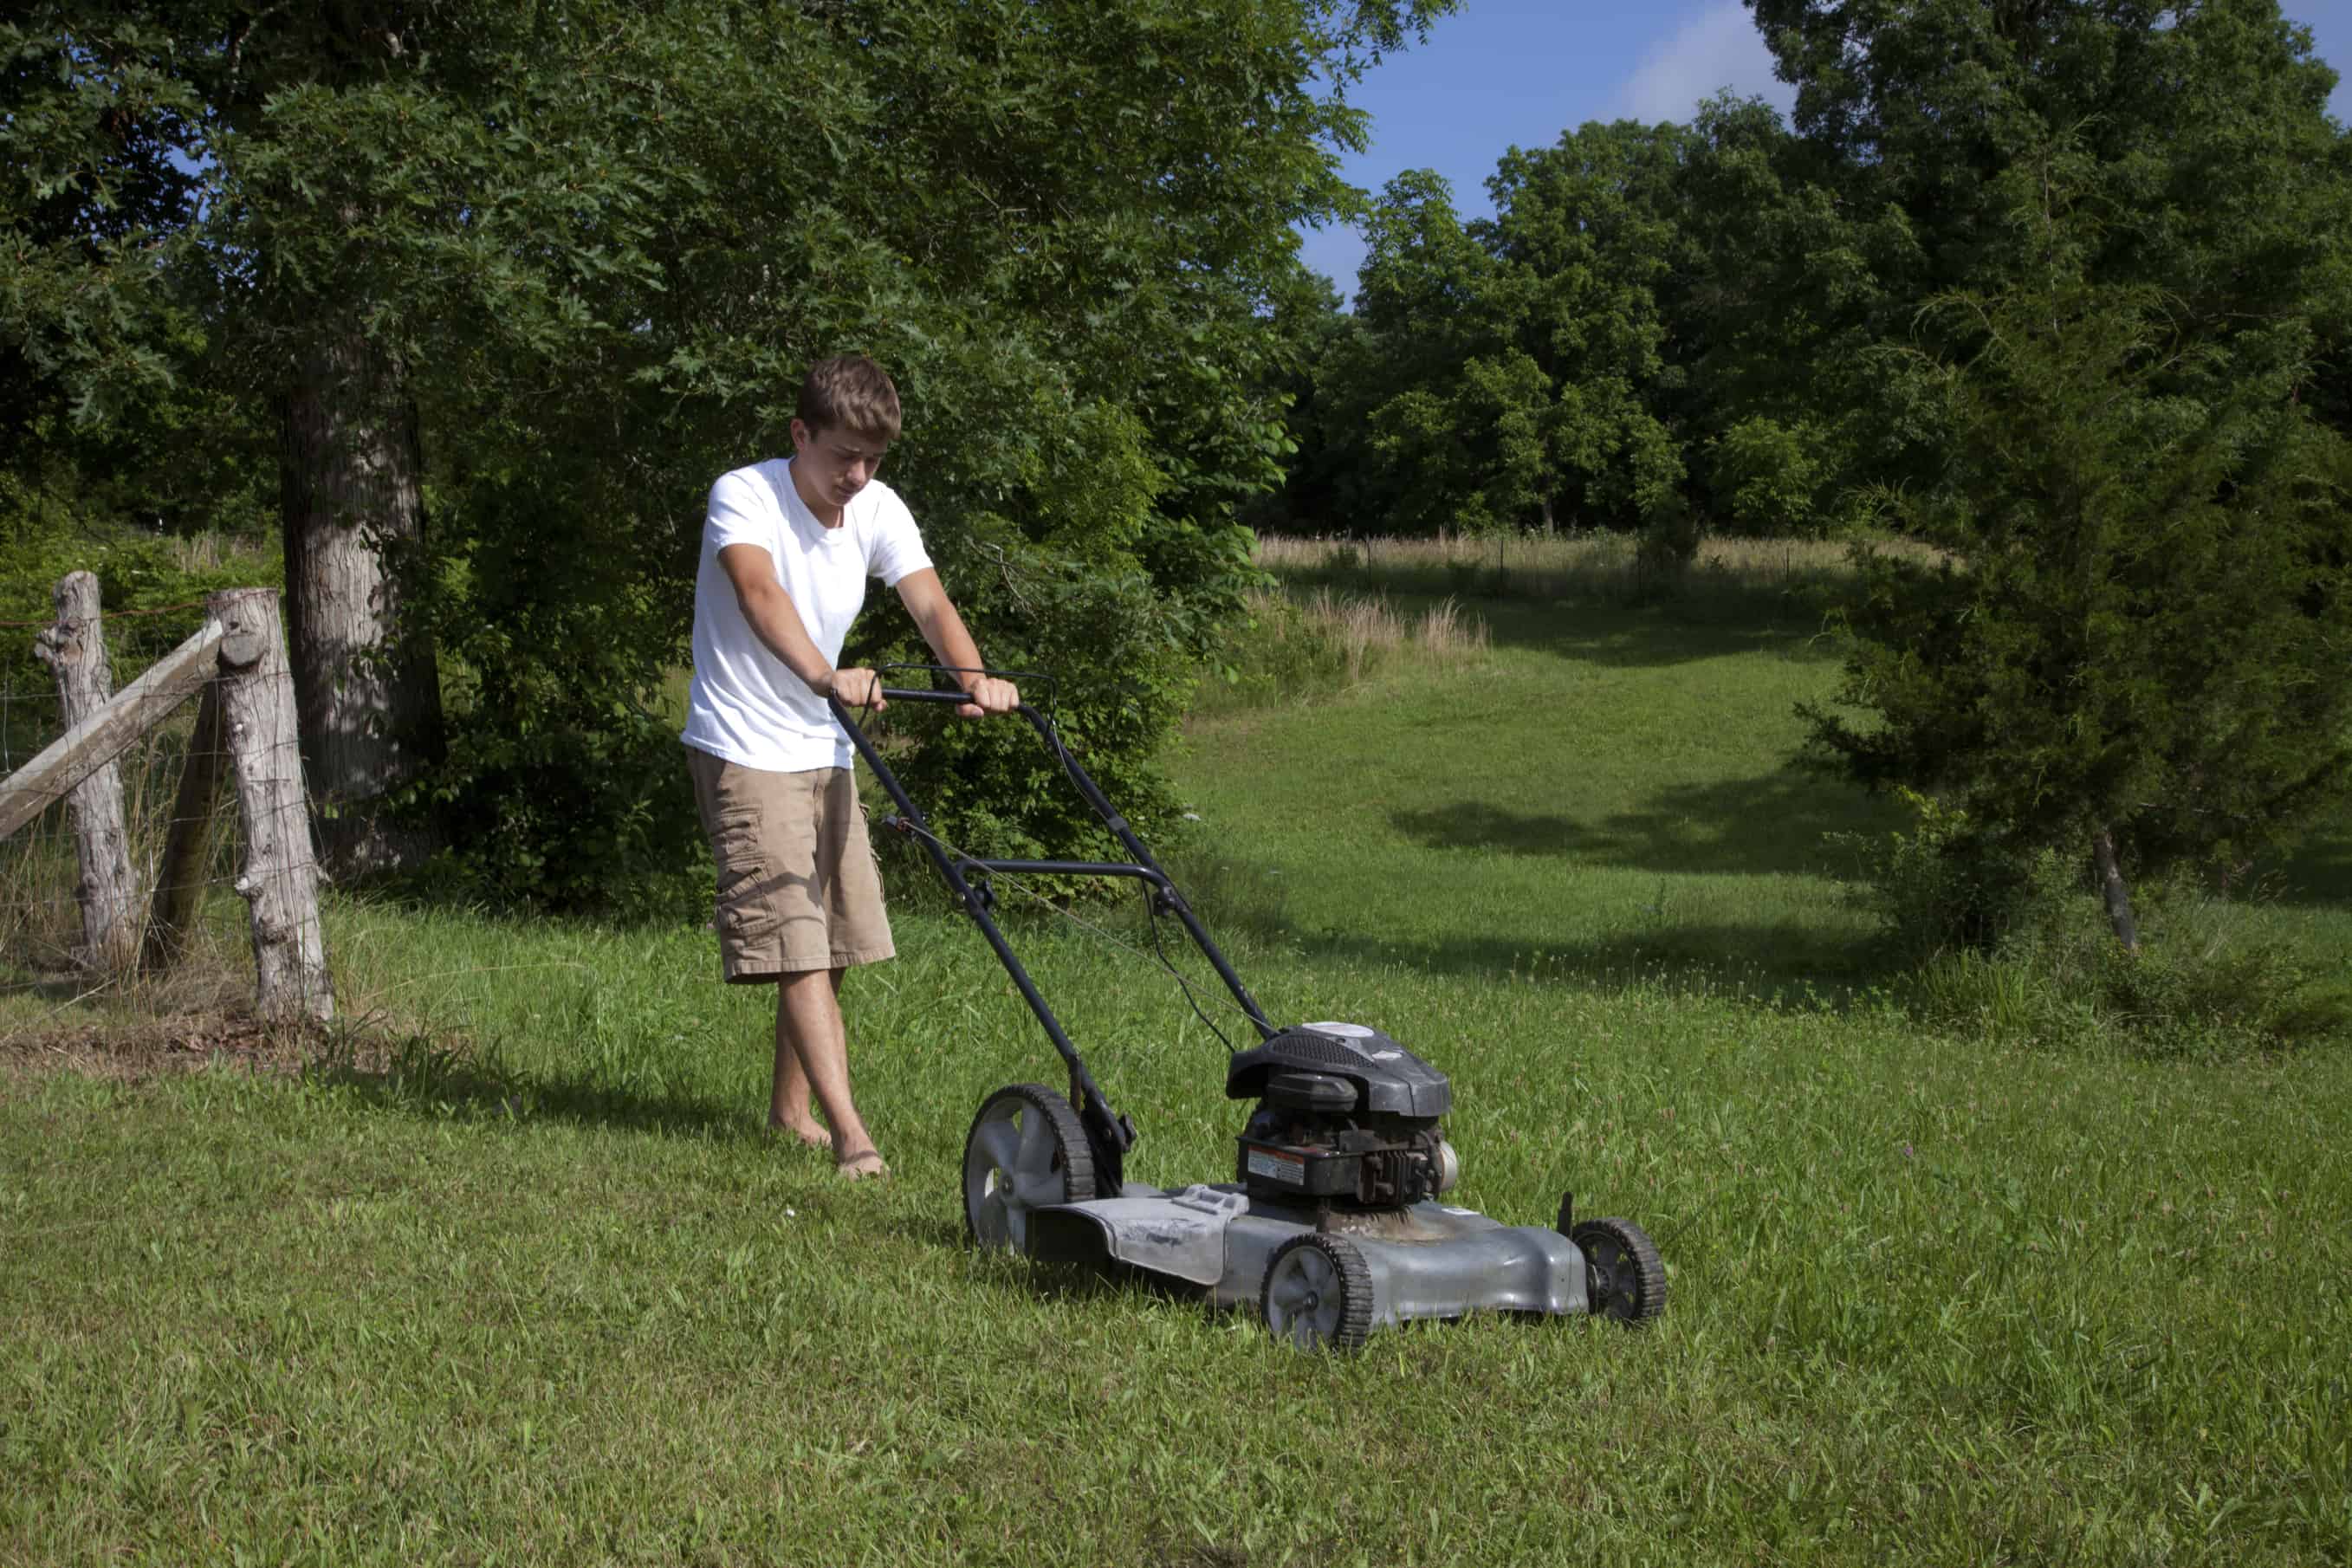 Mowing the grass with a lawnmower